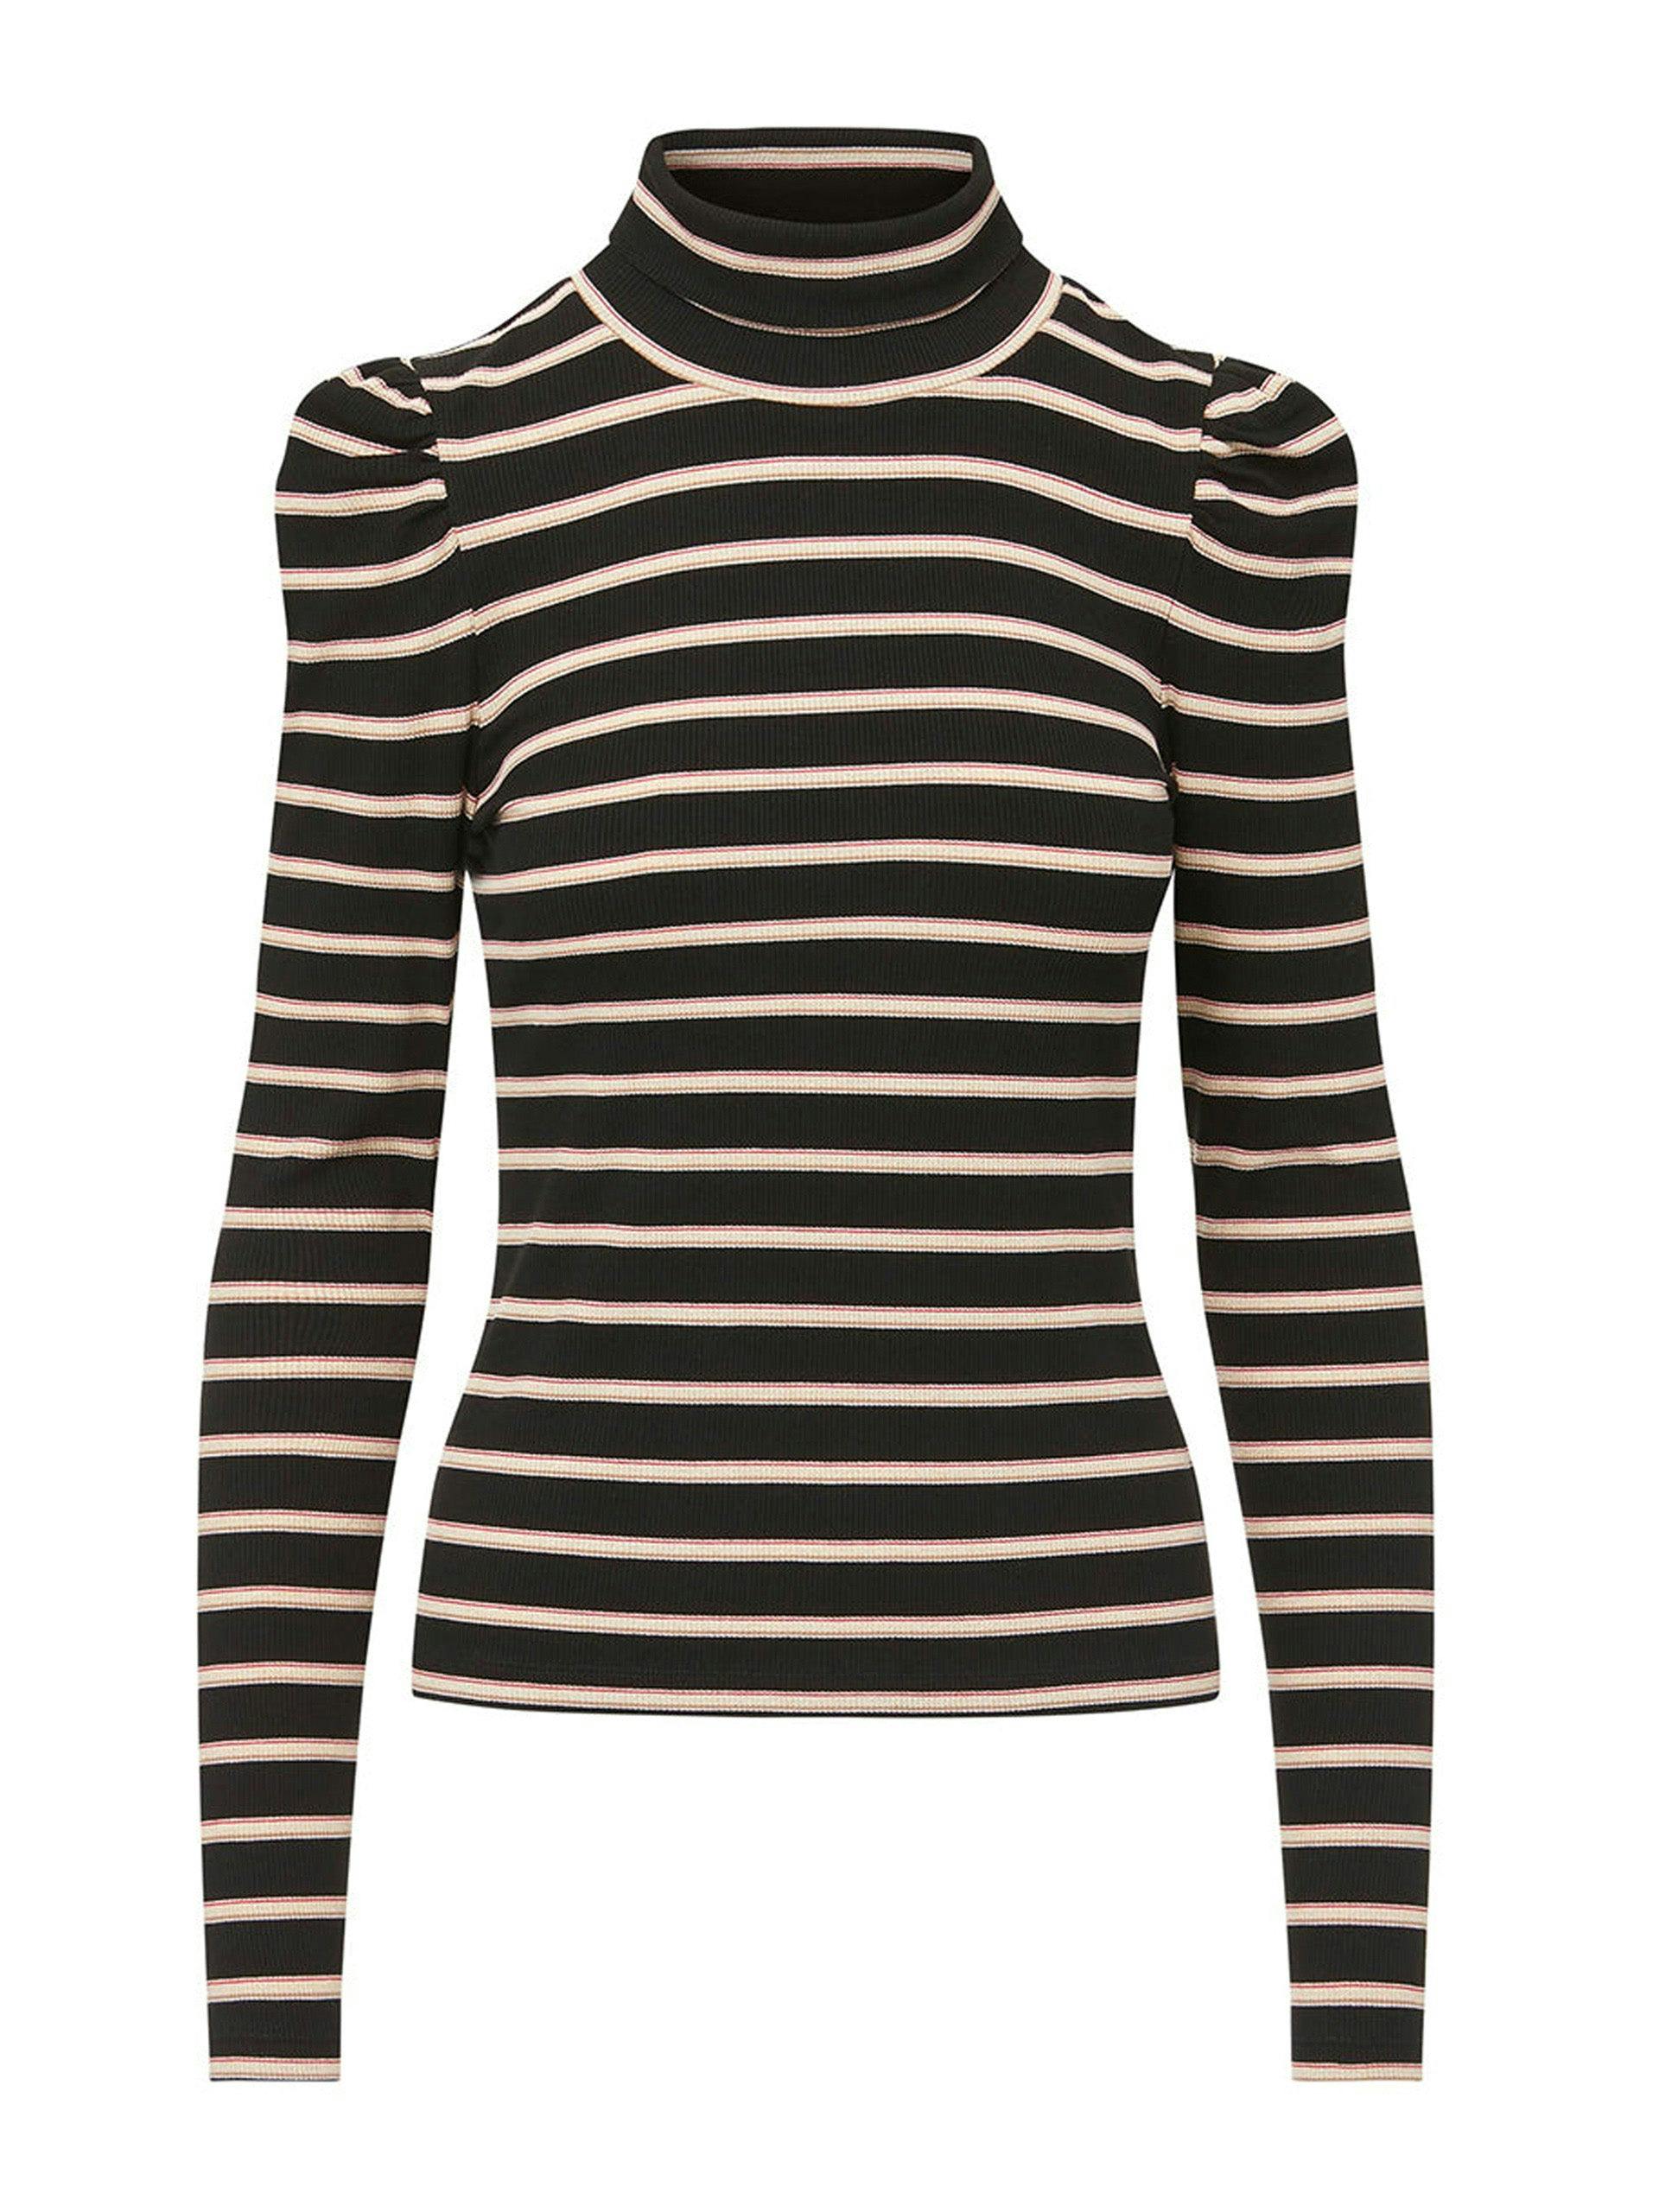 Black, pink and white striped turtleneck